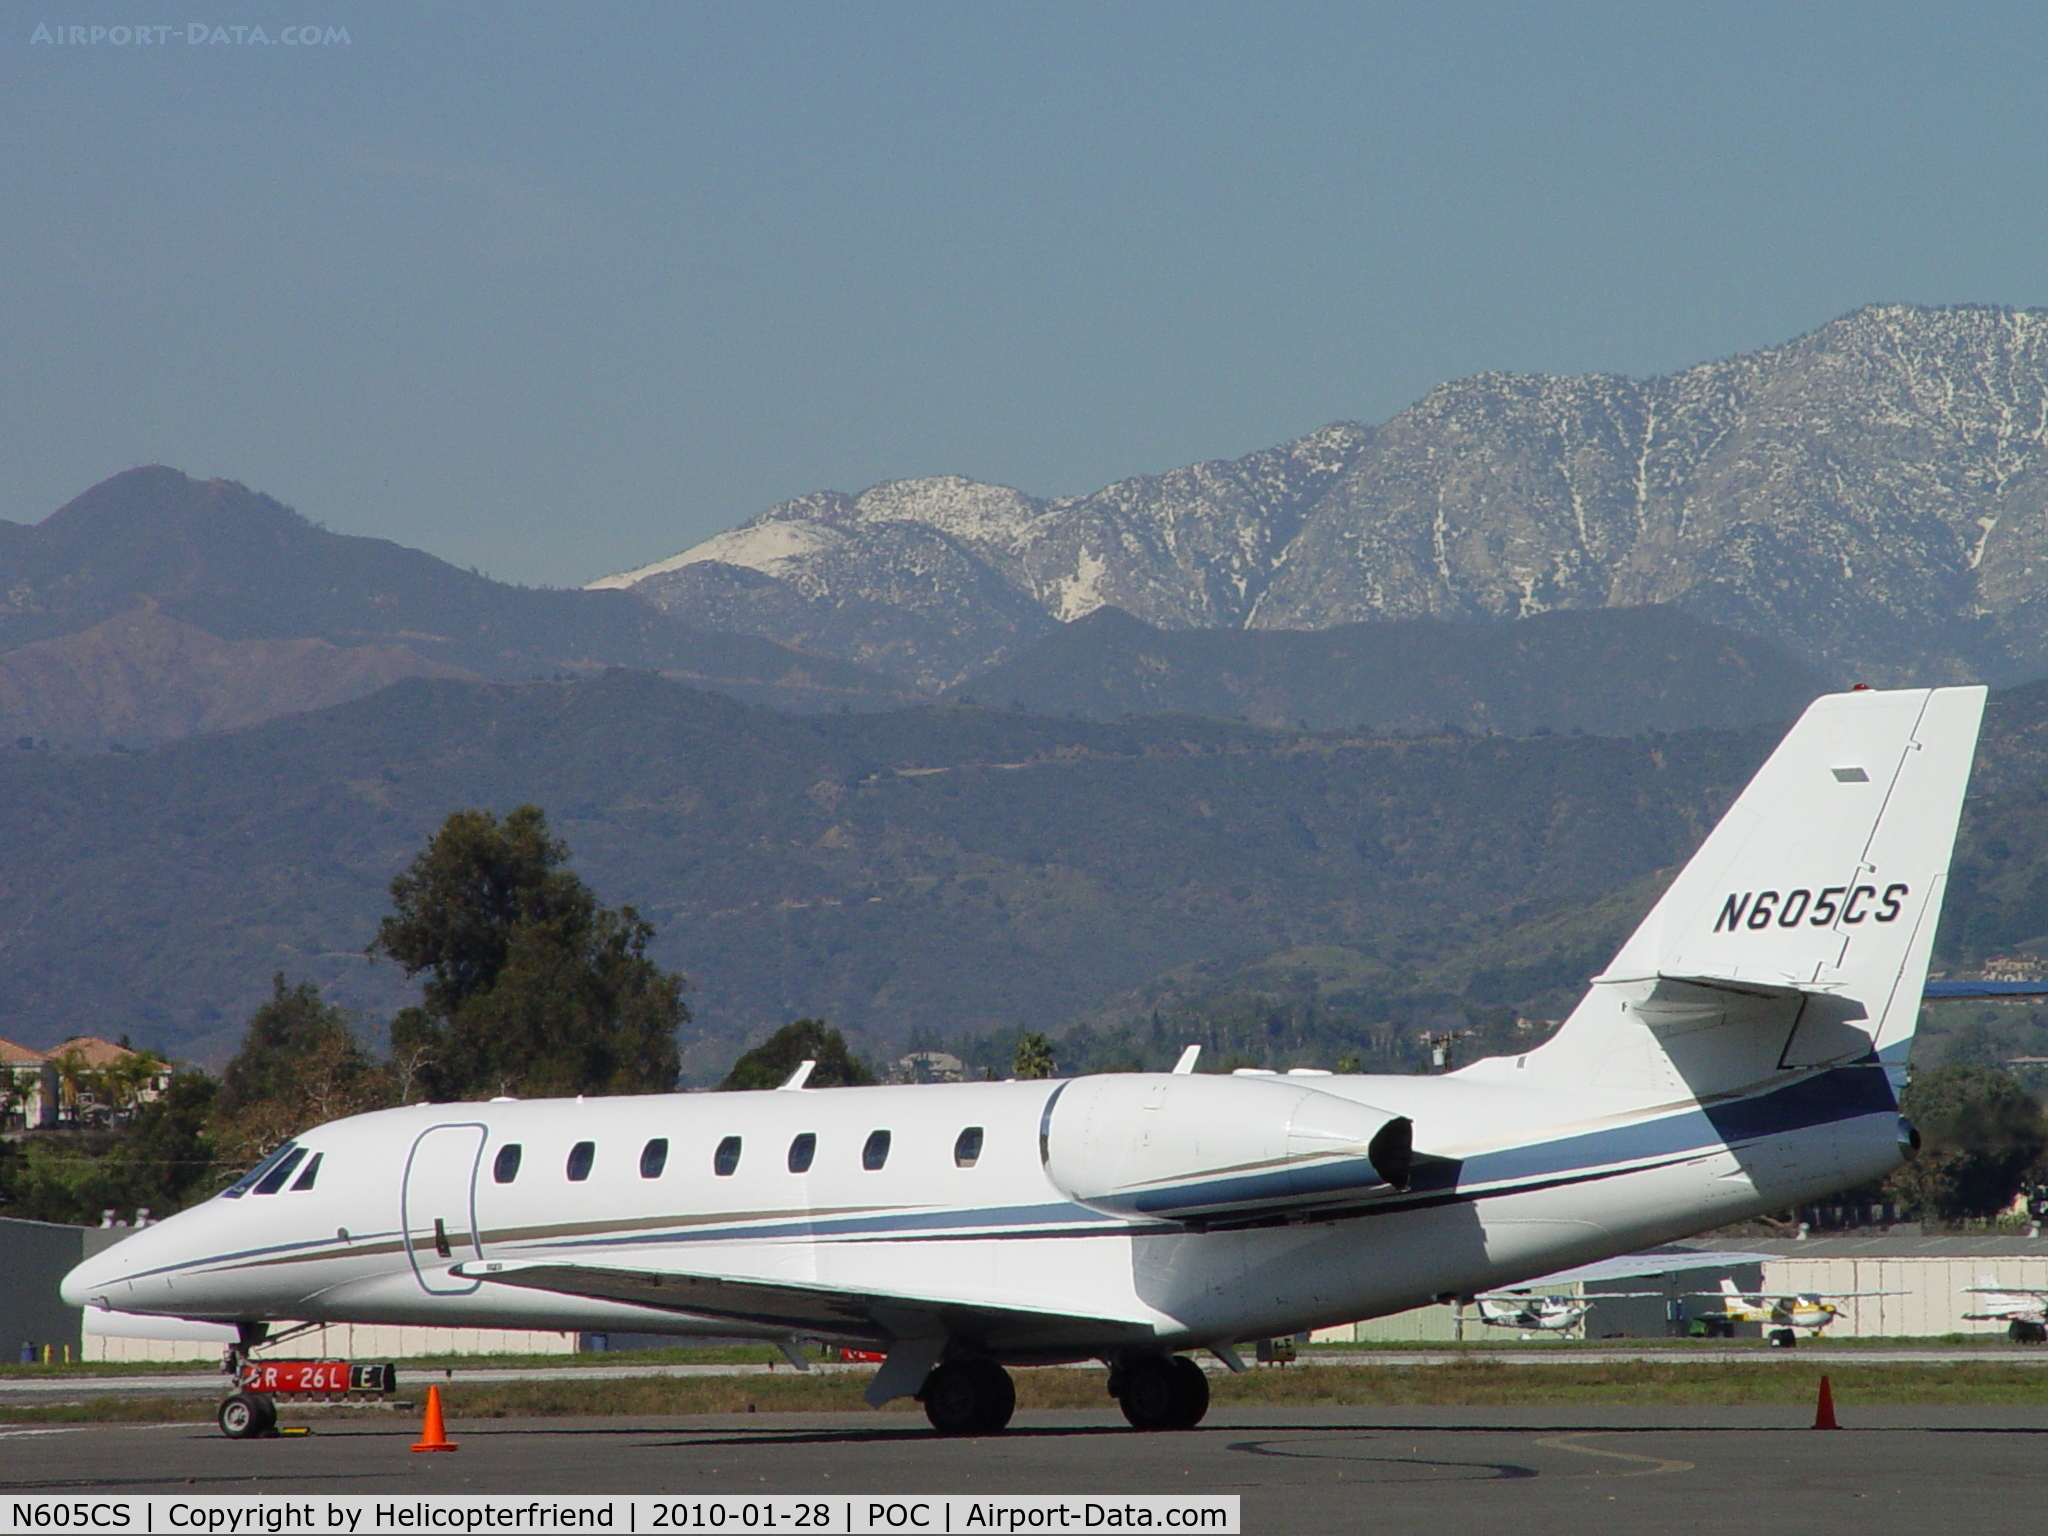 N605CS, 2006 Cessna 680 Citation Sovereign C/N 680-0001, Warming up and getting ready to depart